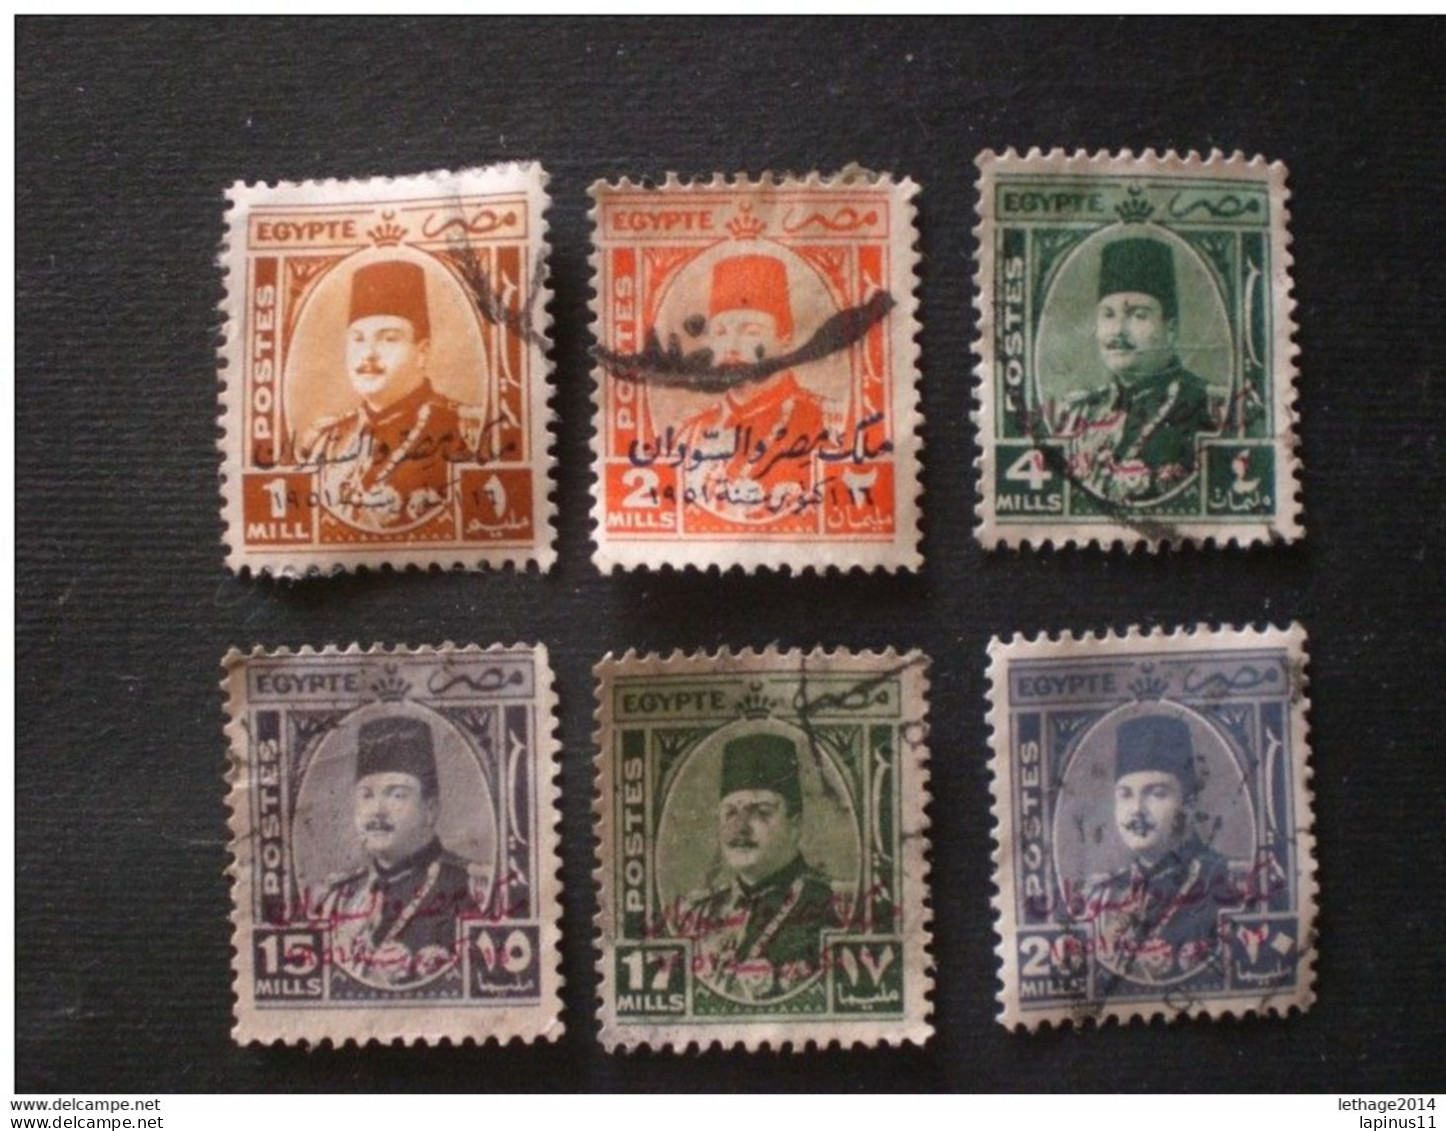 EGYPT 1948 King Farouk - Egypt Postage Stamps Of 1951 Overprinted "SUDAN" In Arabic RARE - Used Stamps